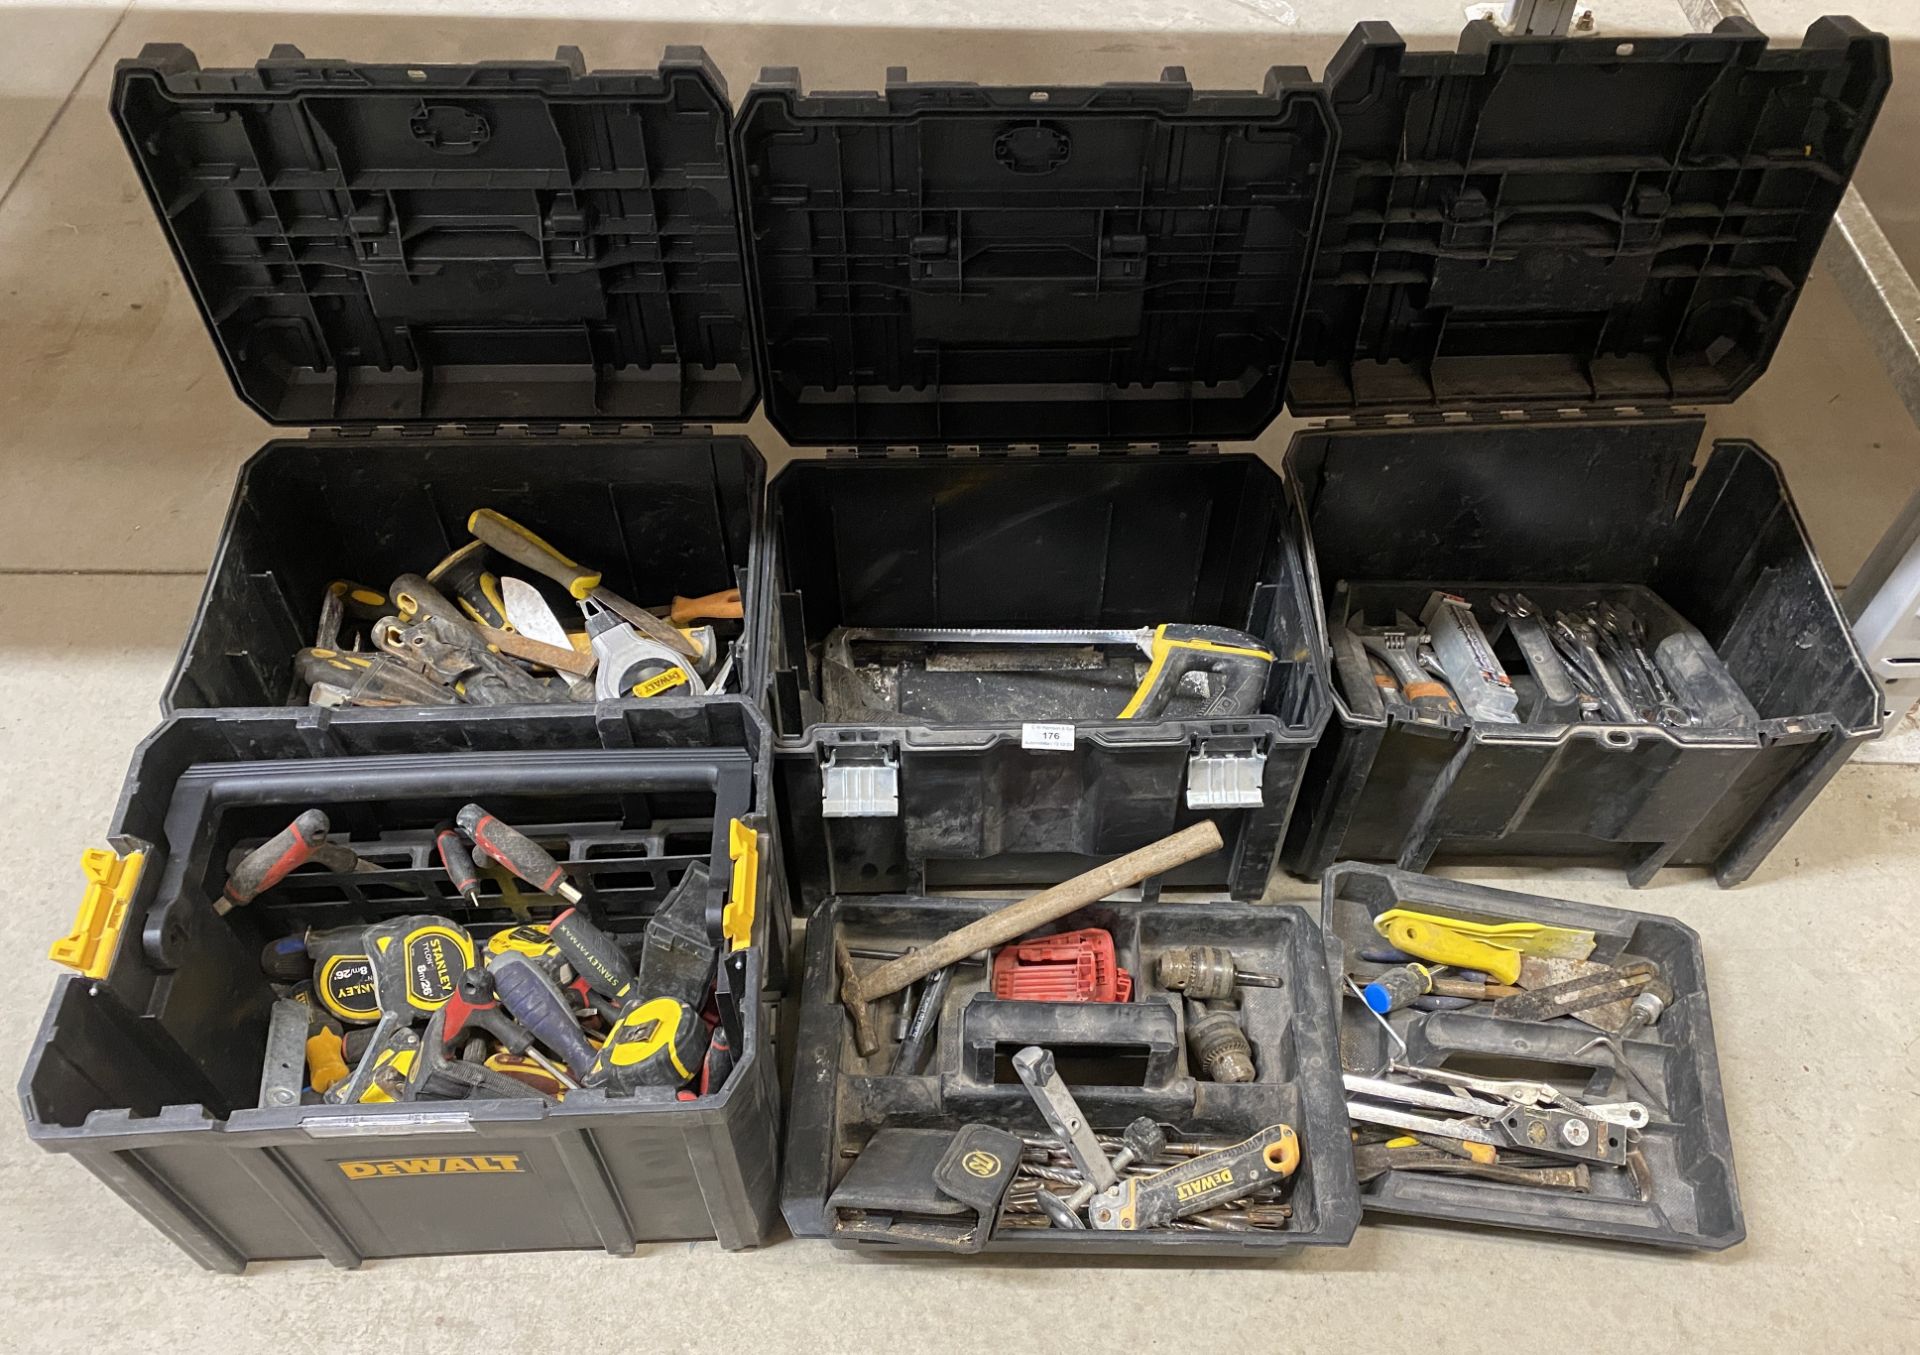 Contents to 6 x DeWalt and other storage boxes - hand tools, spanners, tape measures,